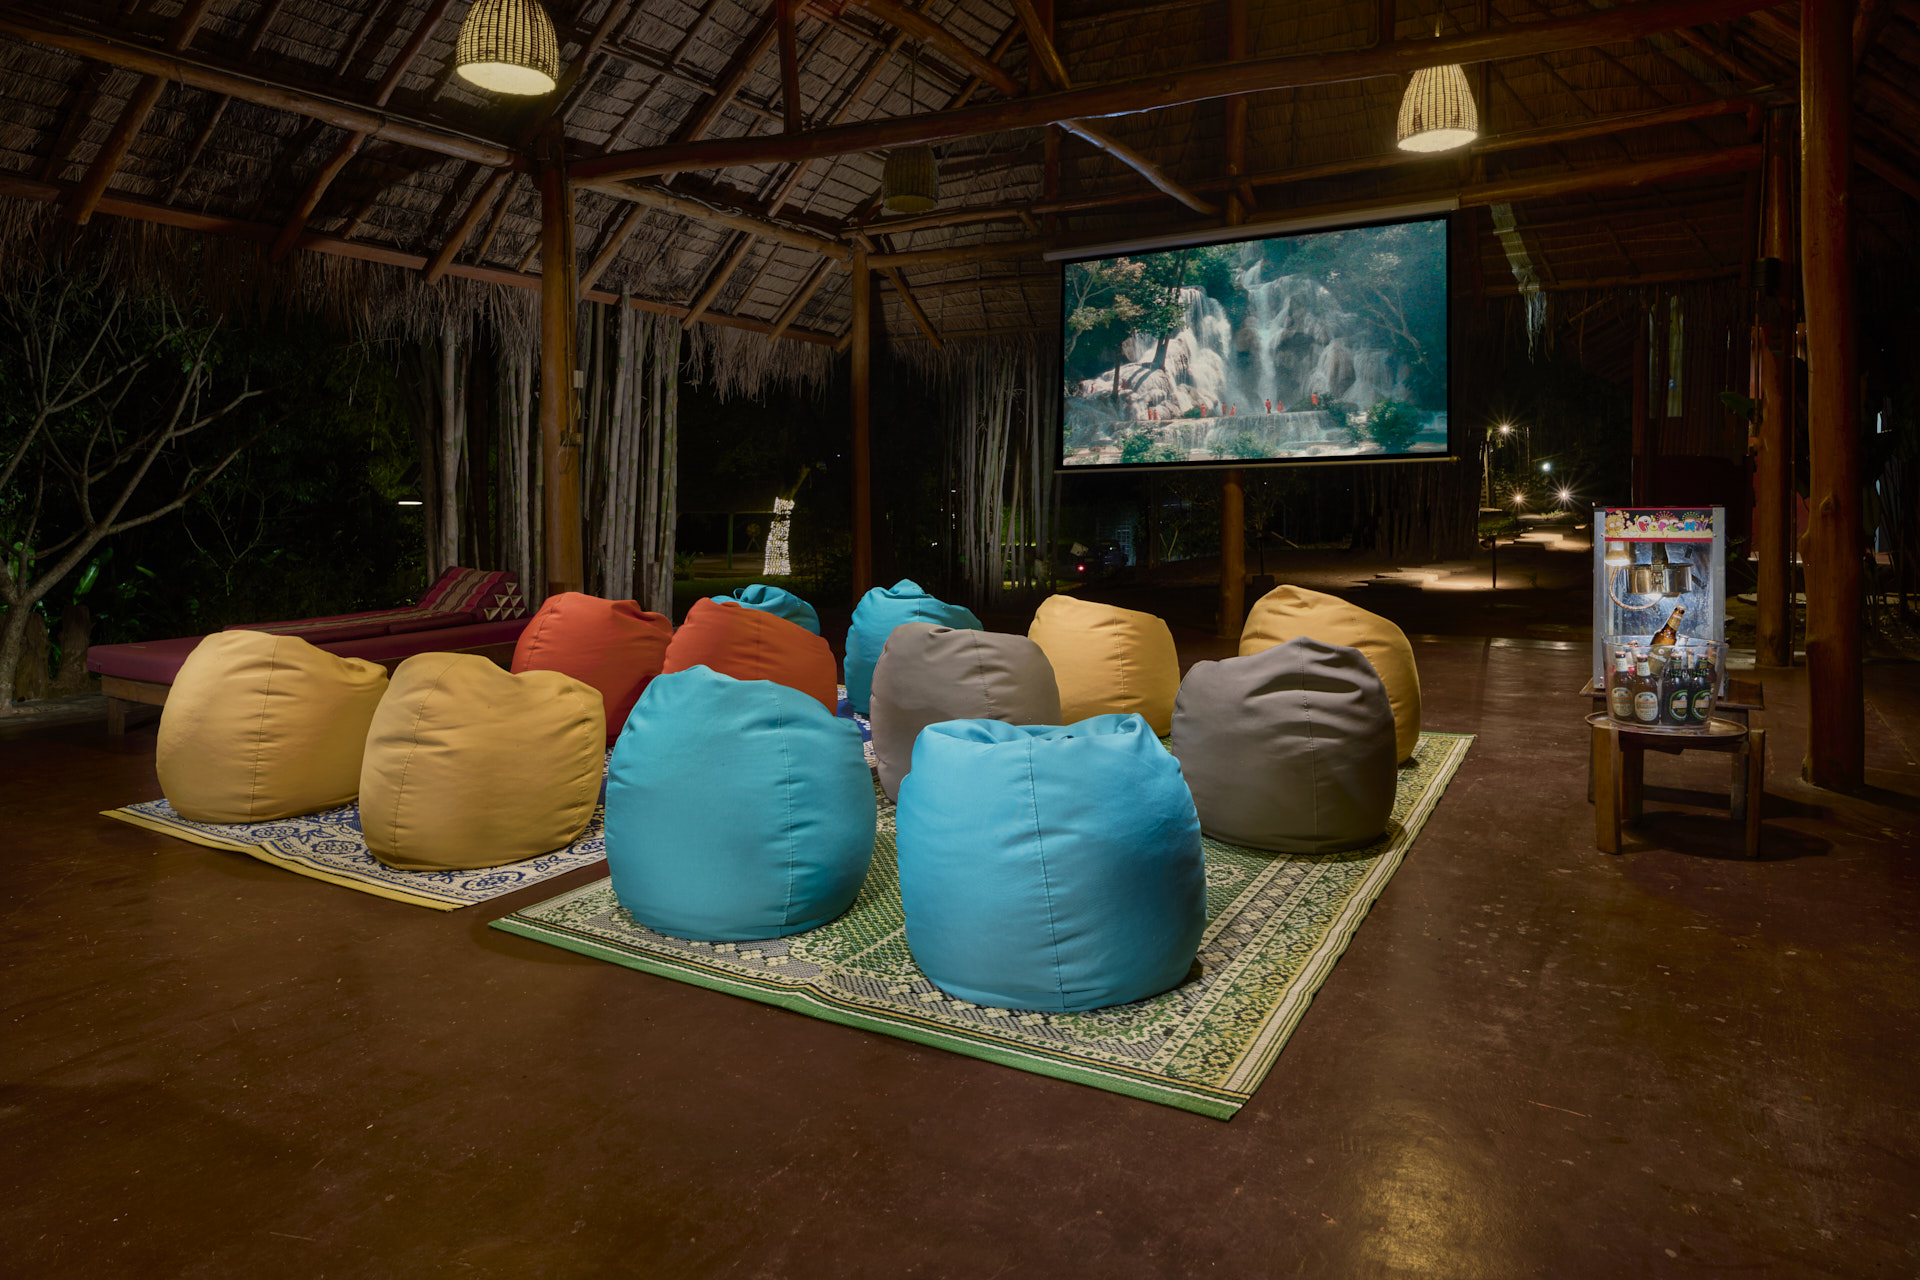 Colorful bean bags on a patterned rug in a dimly lit outdoor cinema at Namkhan Eco Farm, Luang Prabang, with a large screen displaying a movie, surrounded by lush